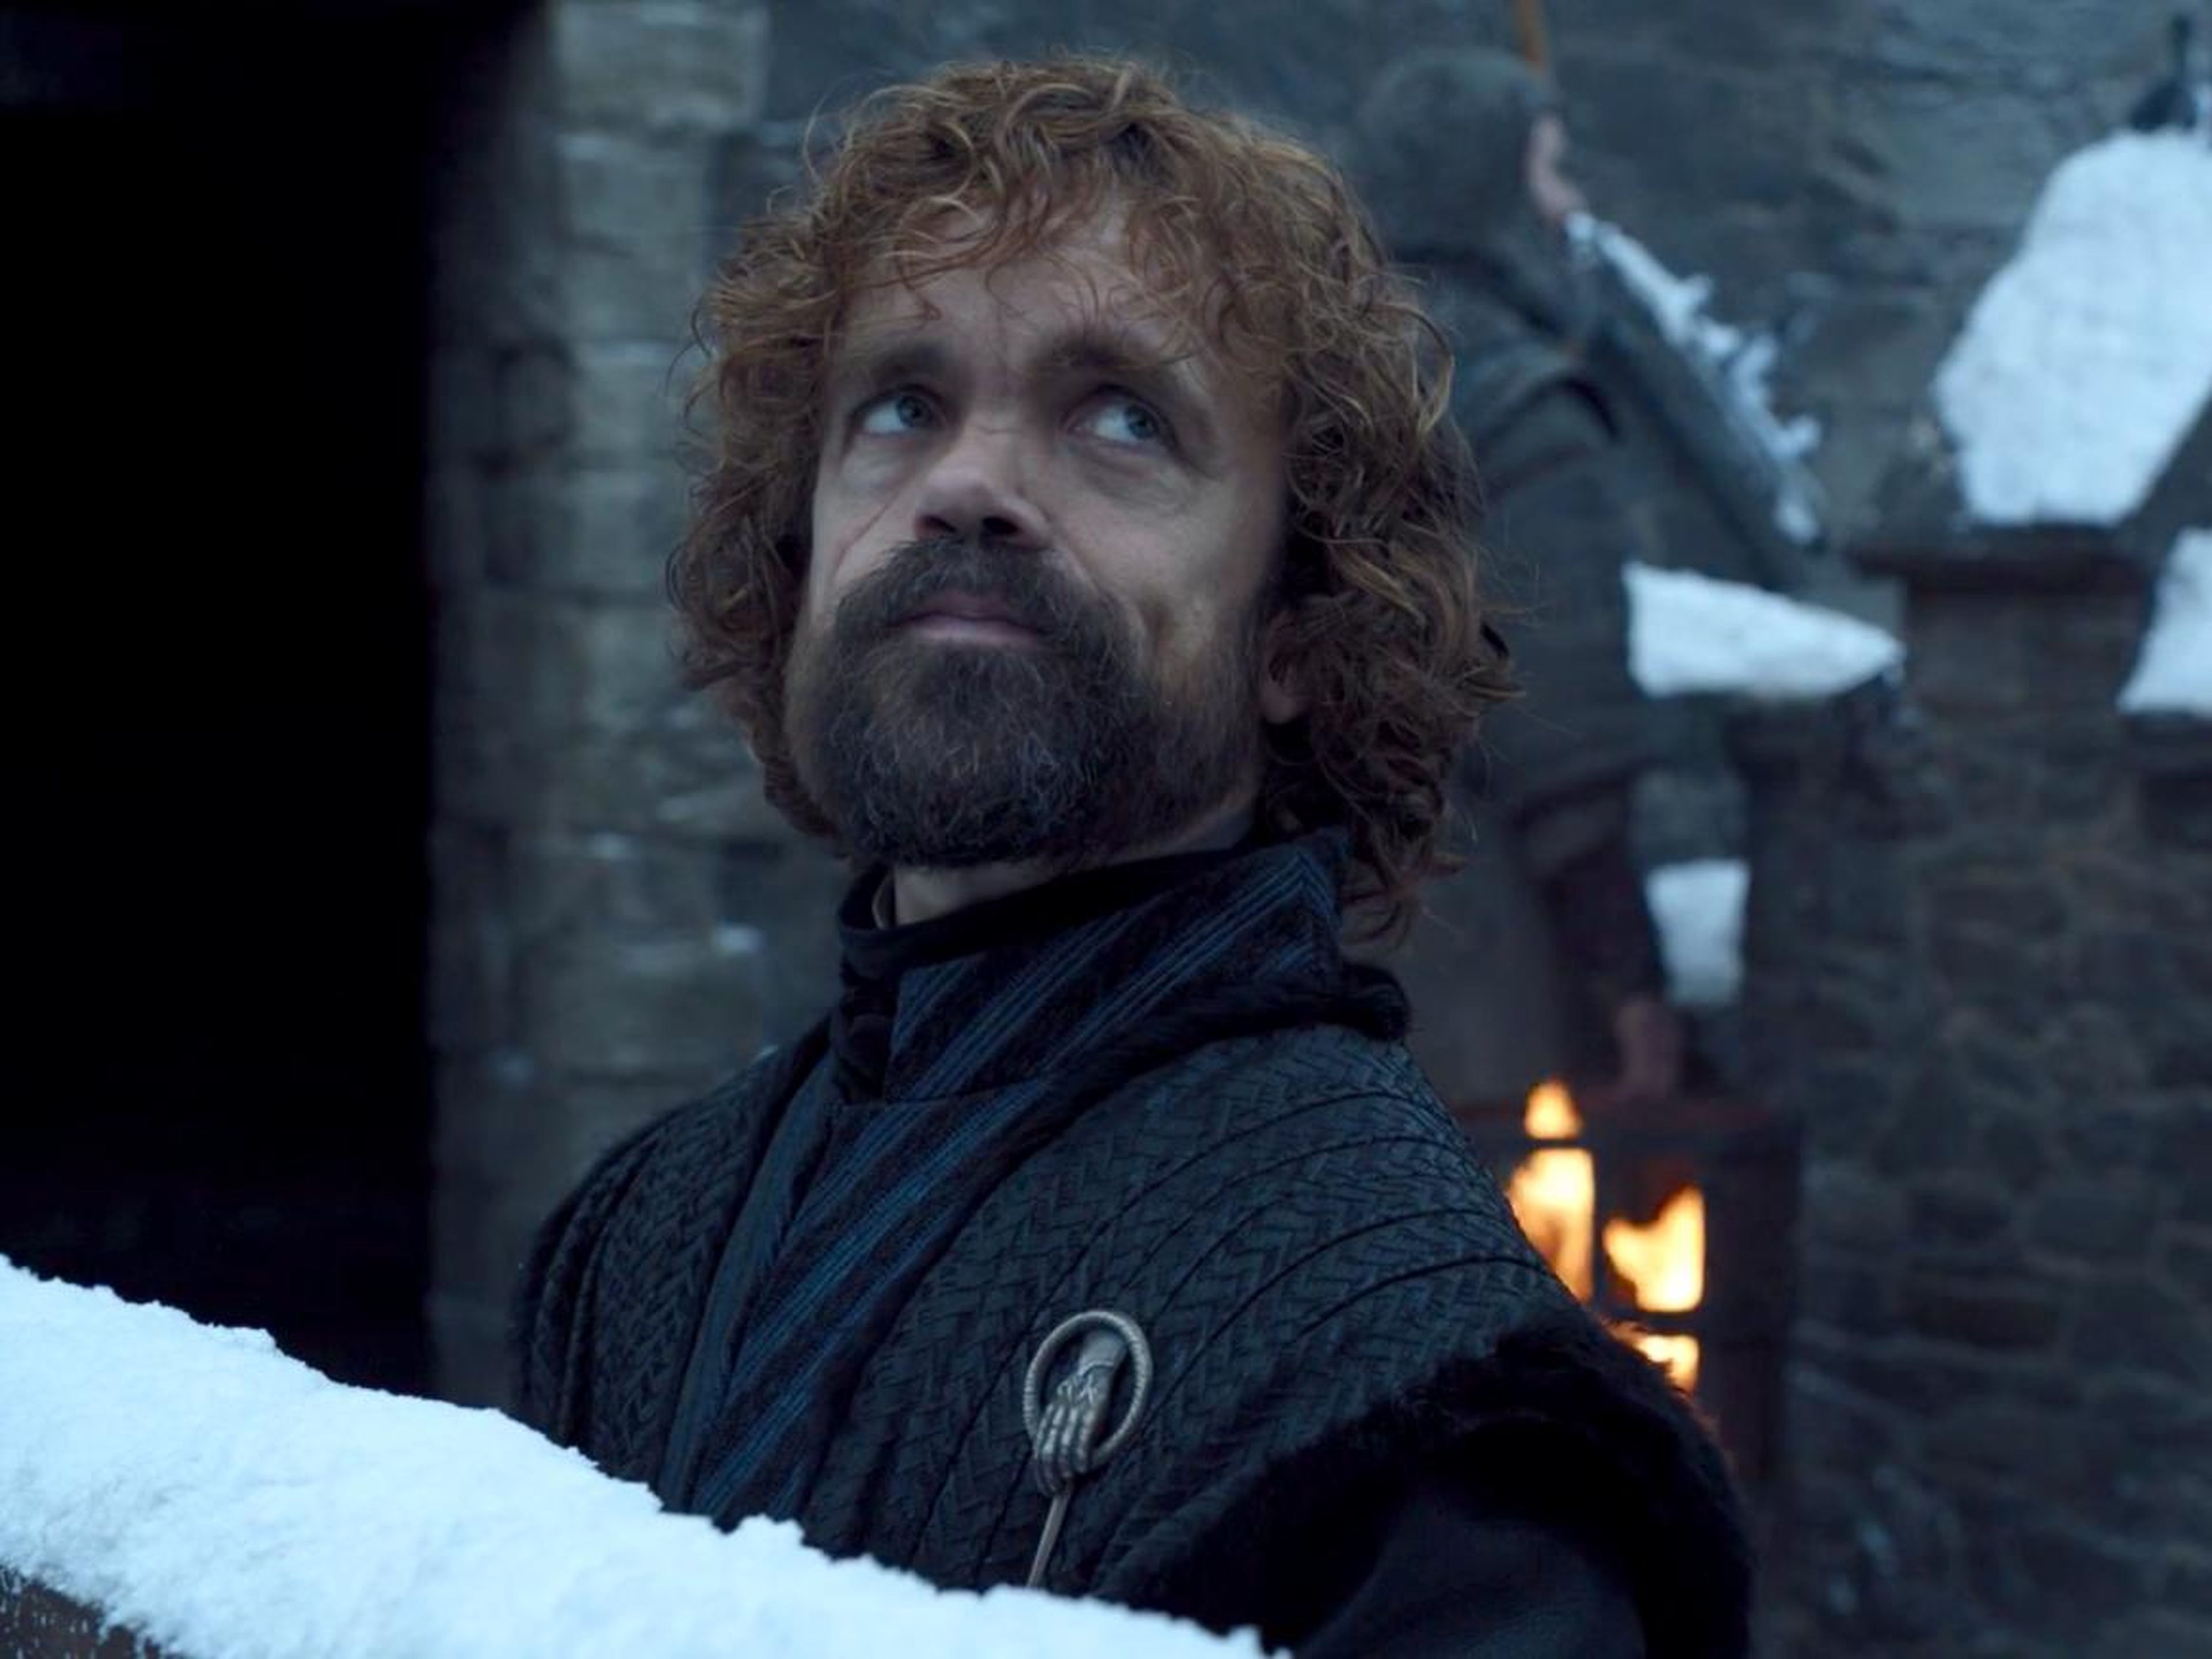 Peter Dinklage as Tyrion Lannister on "Game of Thrones."